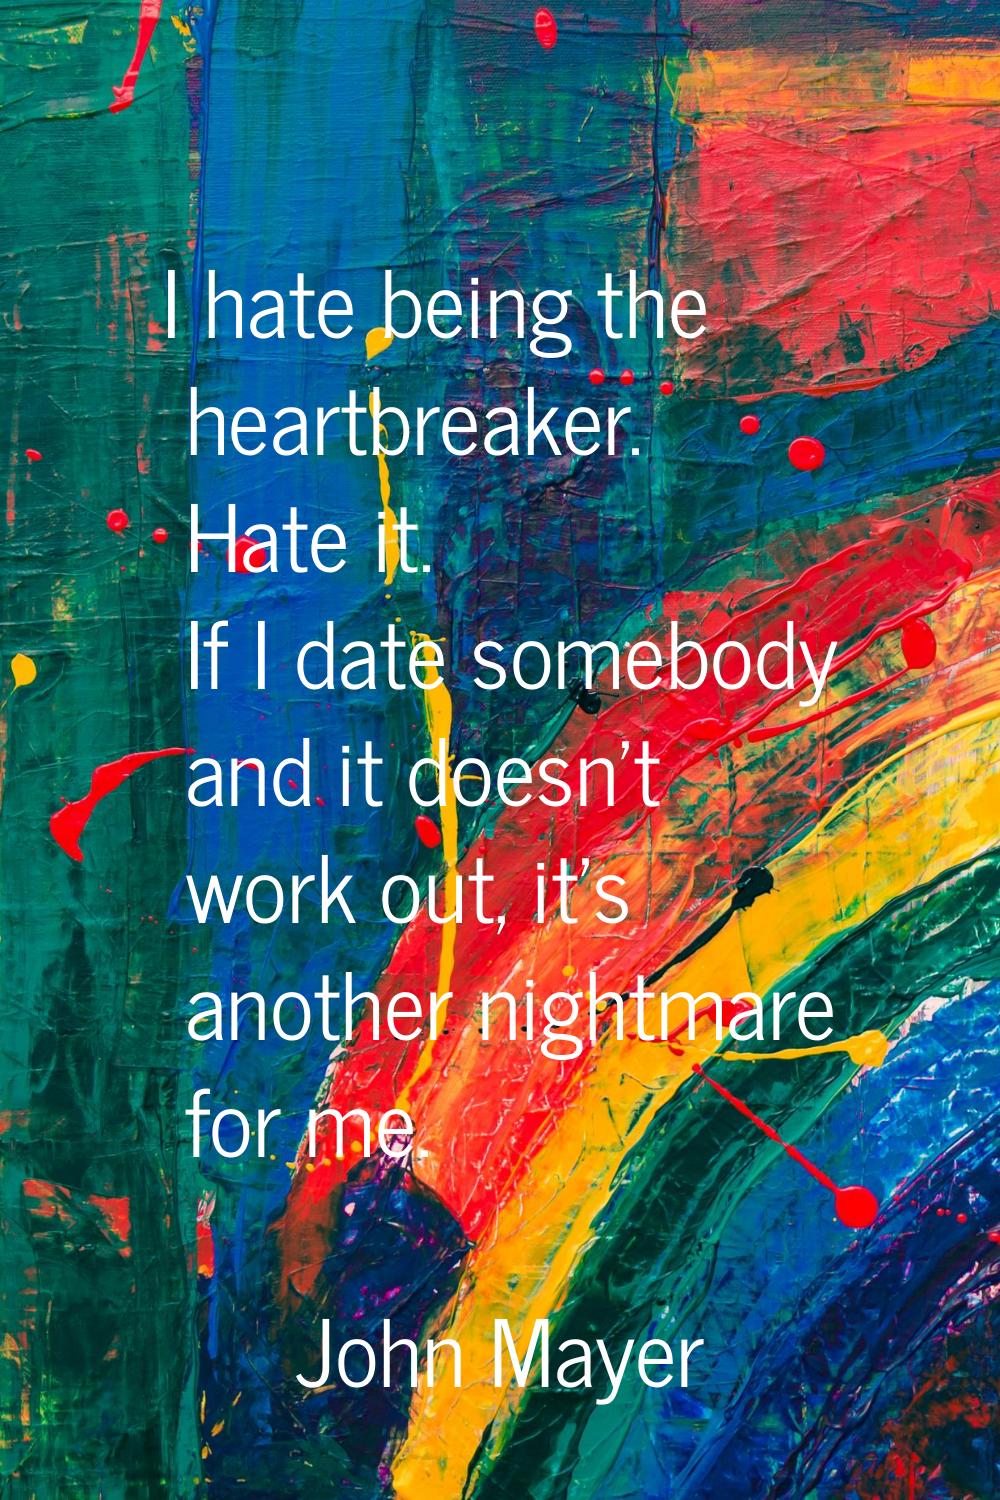 I hate being the heartbreaker. Hate it. If I date somebody and it doesn't work out, it's another ni